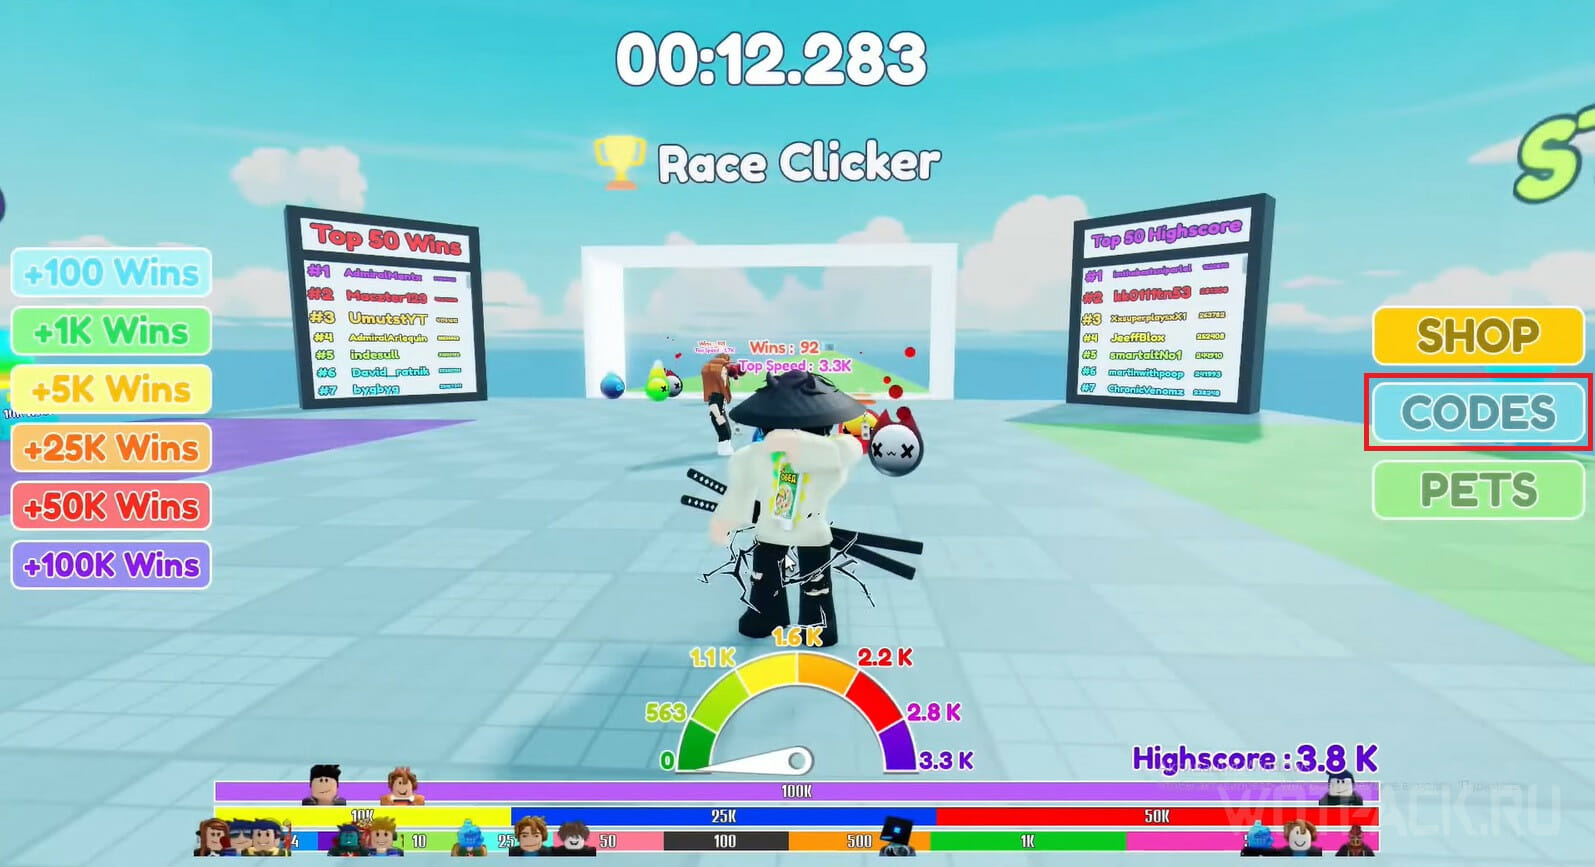 Racing Clicker: codes for December 2023